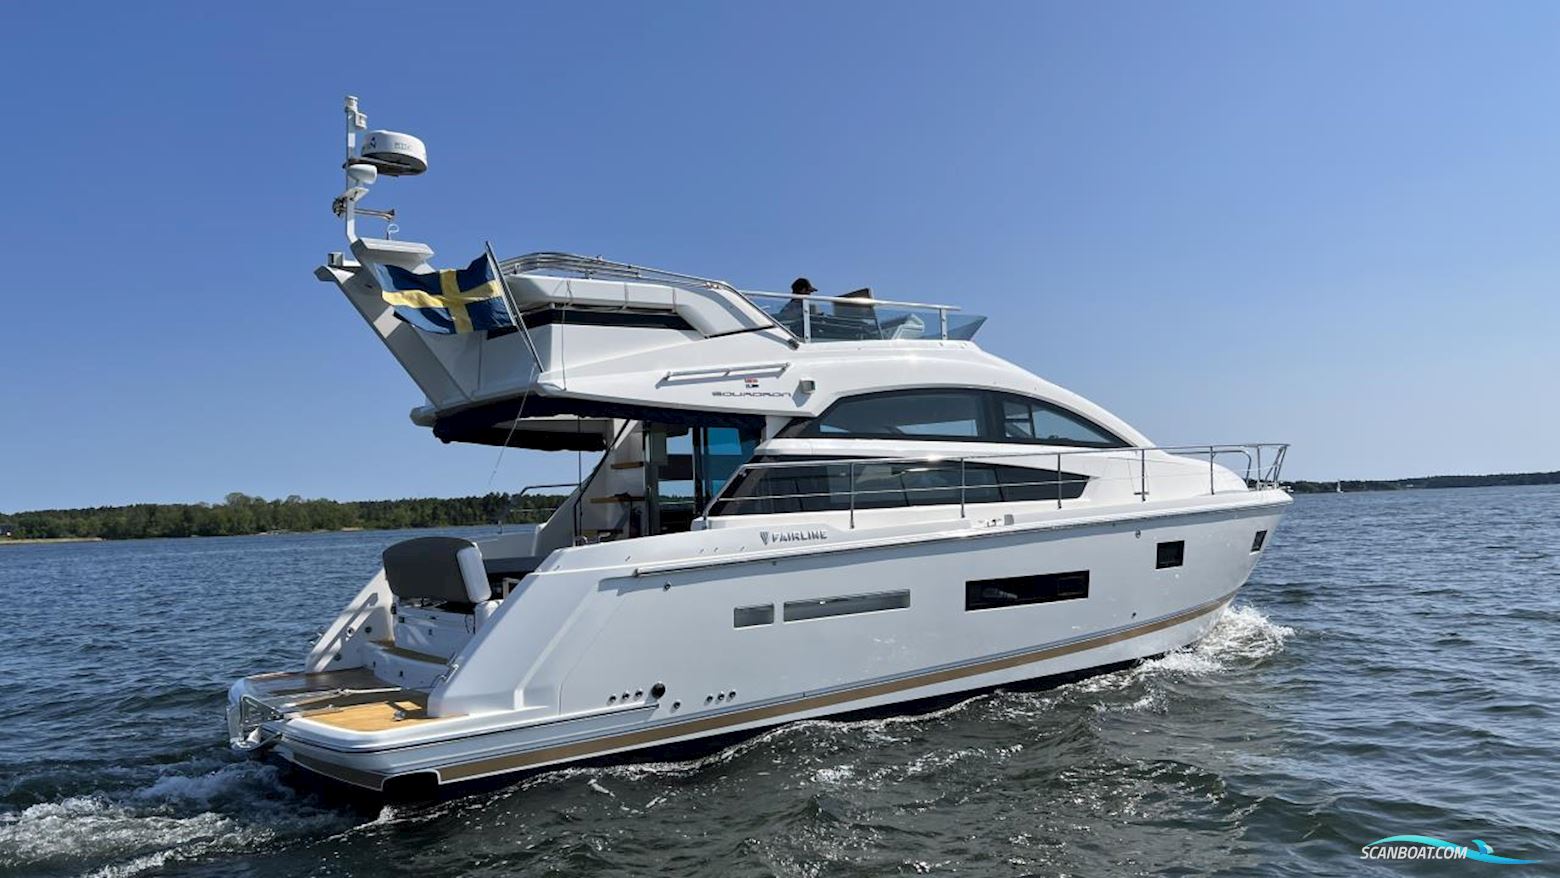 Fairline Squadron 42 Motor boat 2013, with 2x Volvo Penta D6-370 Ca 198h engine, Sweden